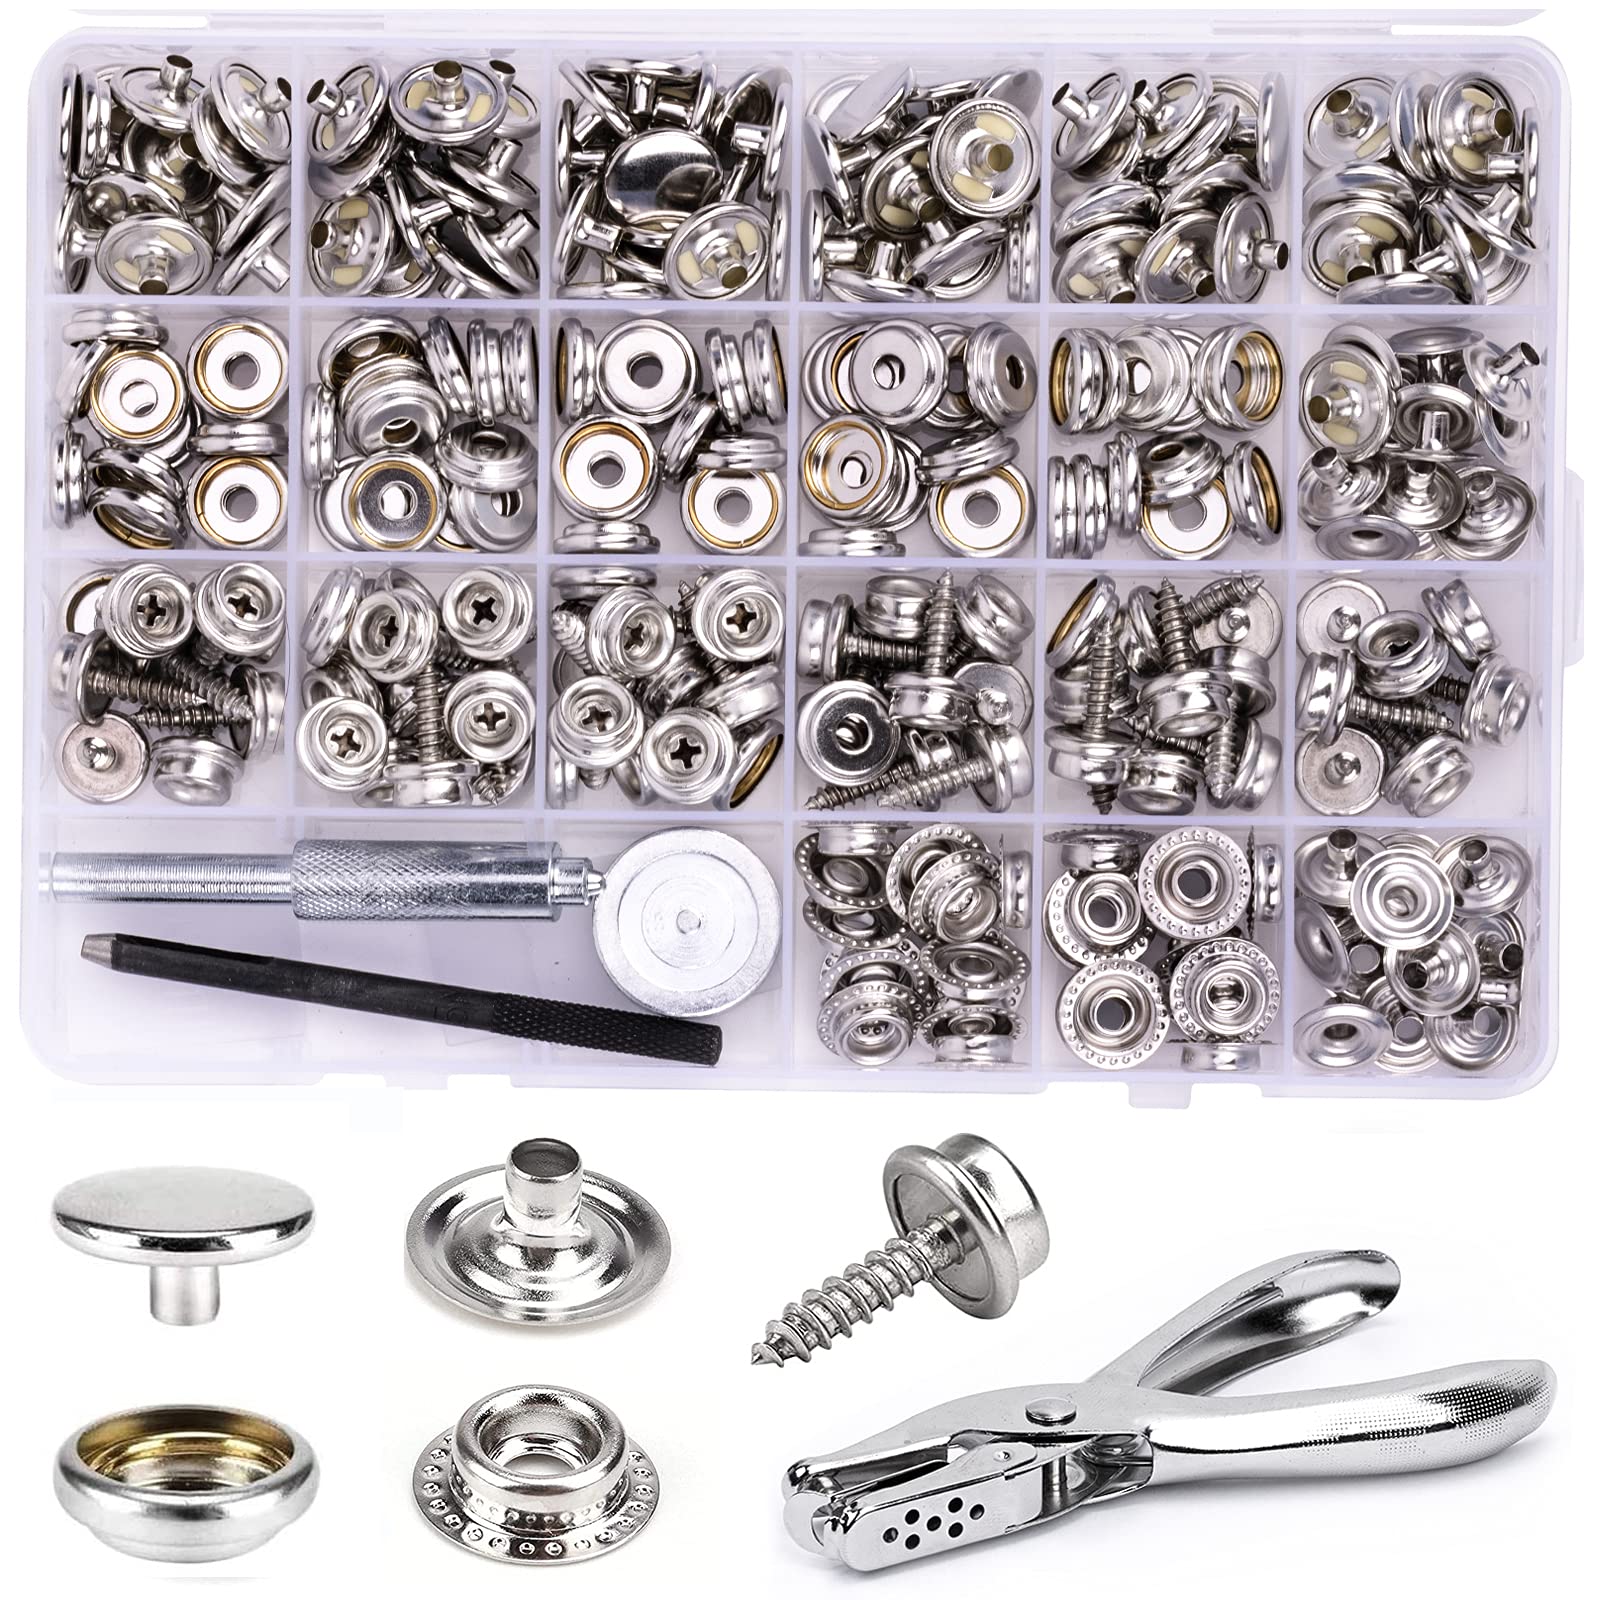 Canvas Snap Kit, Yofuly 274 Pcs Marine Grade Boat Canvas Snaps Stainless  Steel Screw Boat Carpet